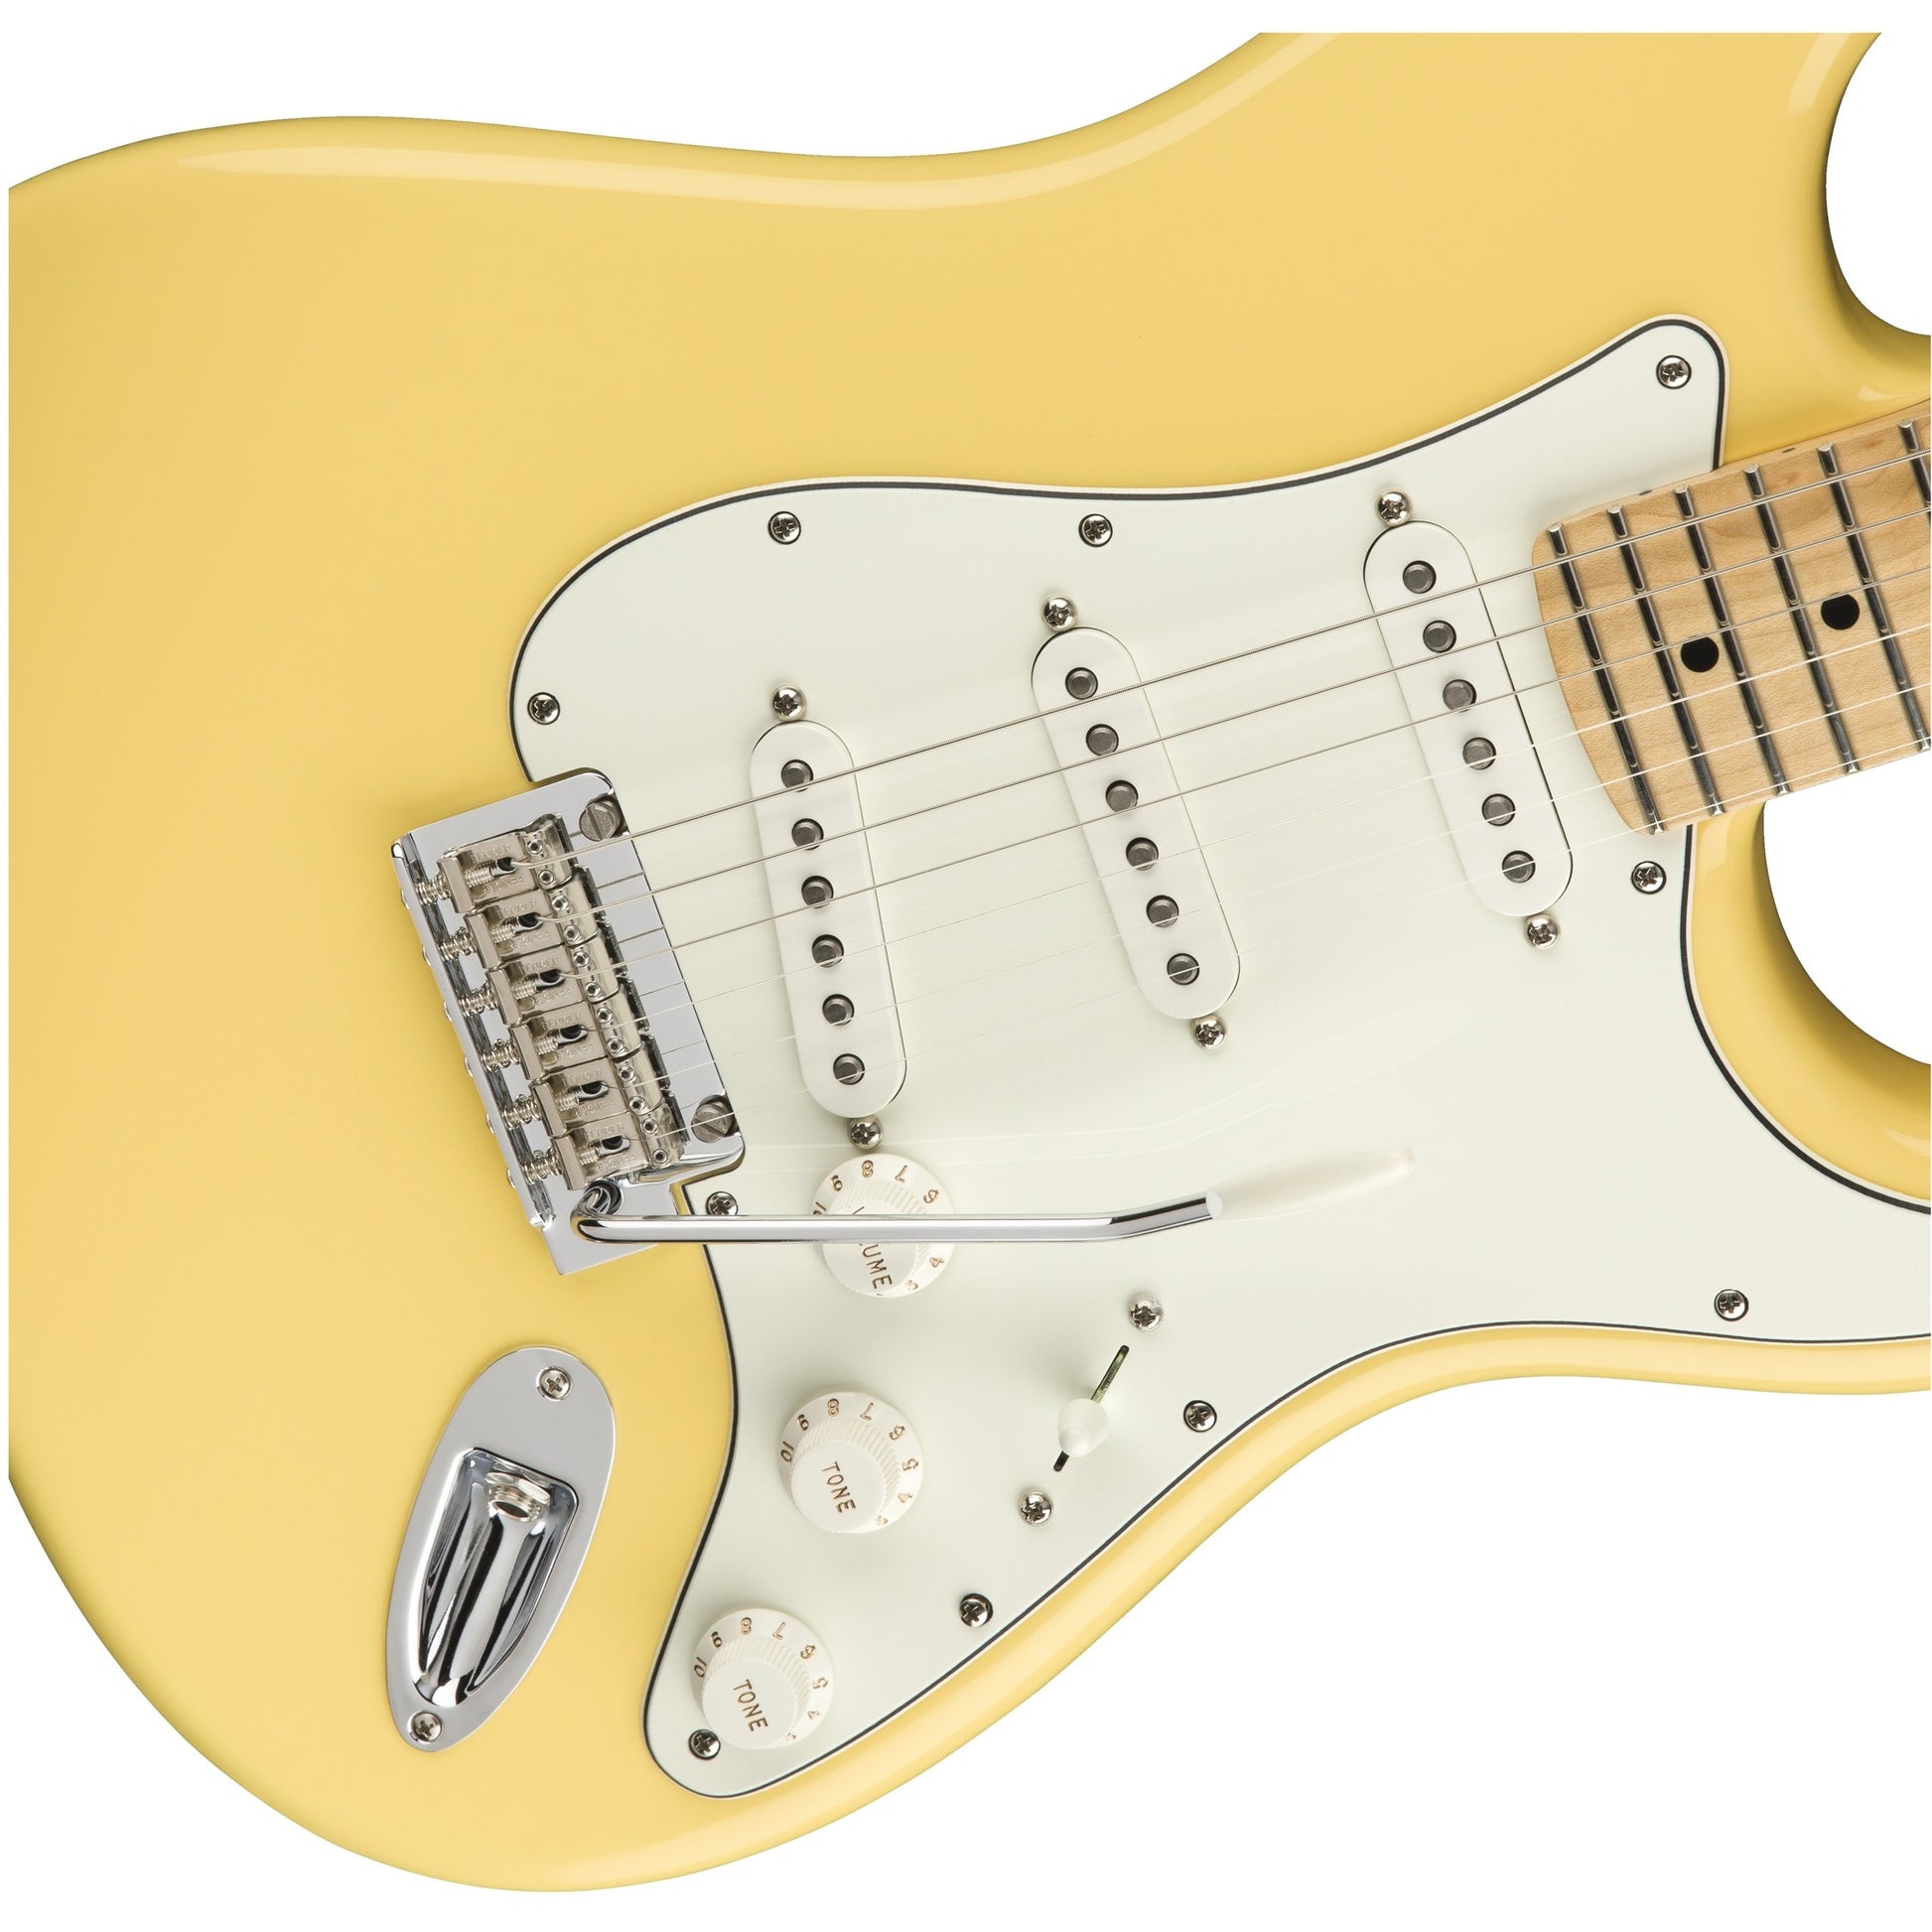 Bridge and Pickups of Fender Player Stratocaster